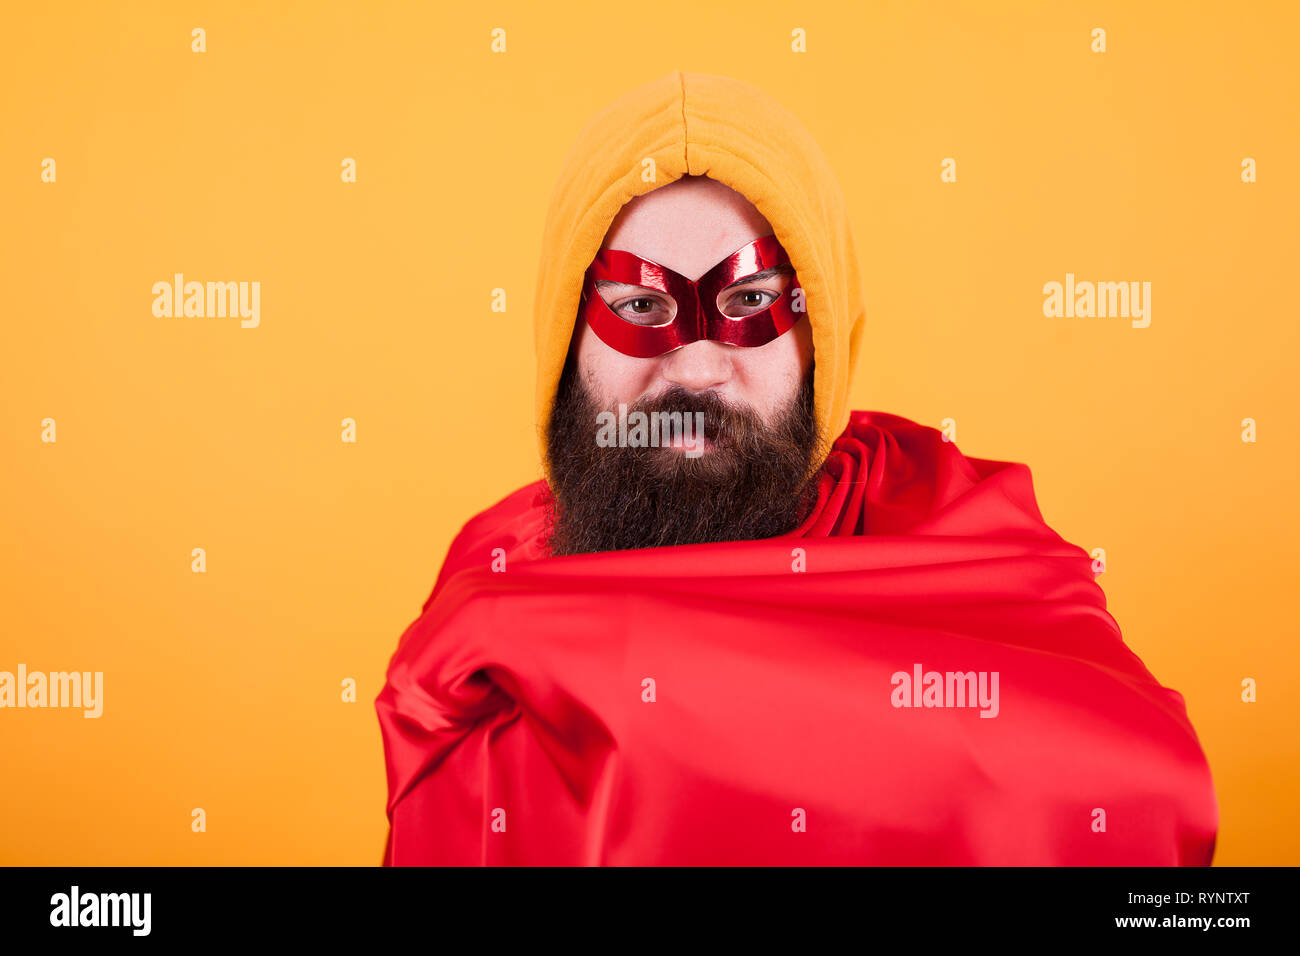 Bearded superhero with red mask showing his red cape over yellow background. Handsome superhero. Stock Photo